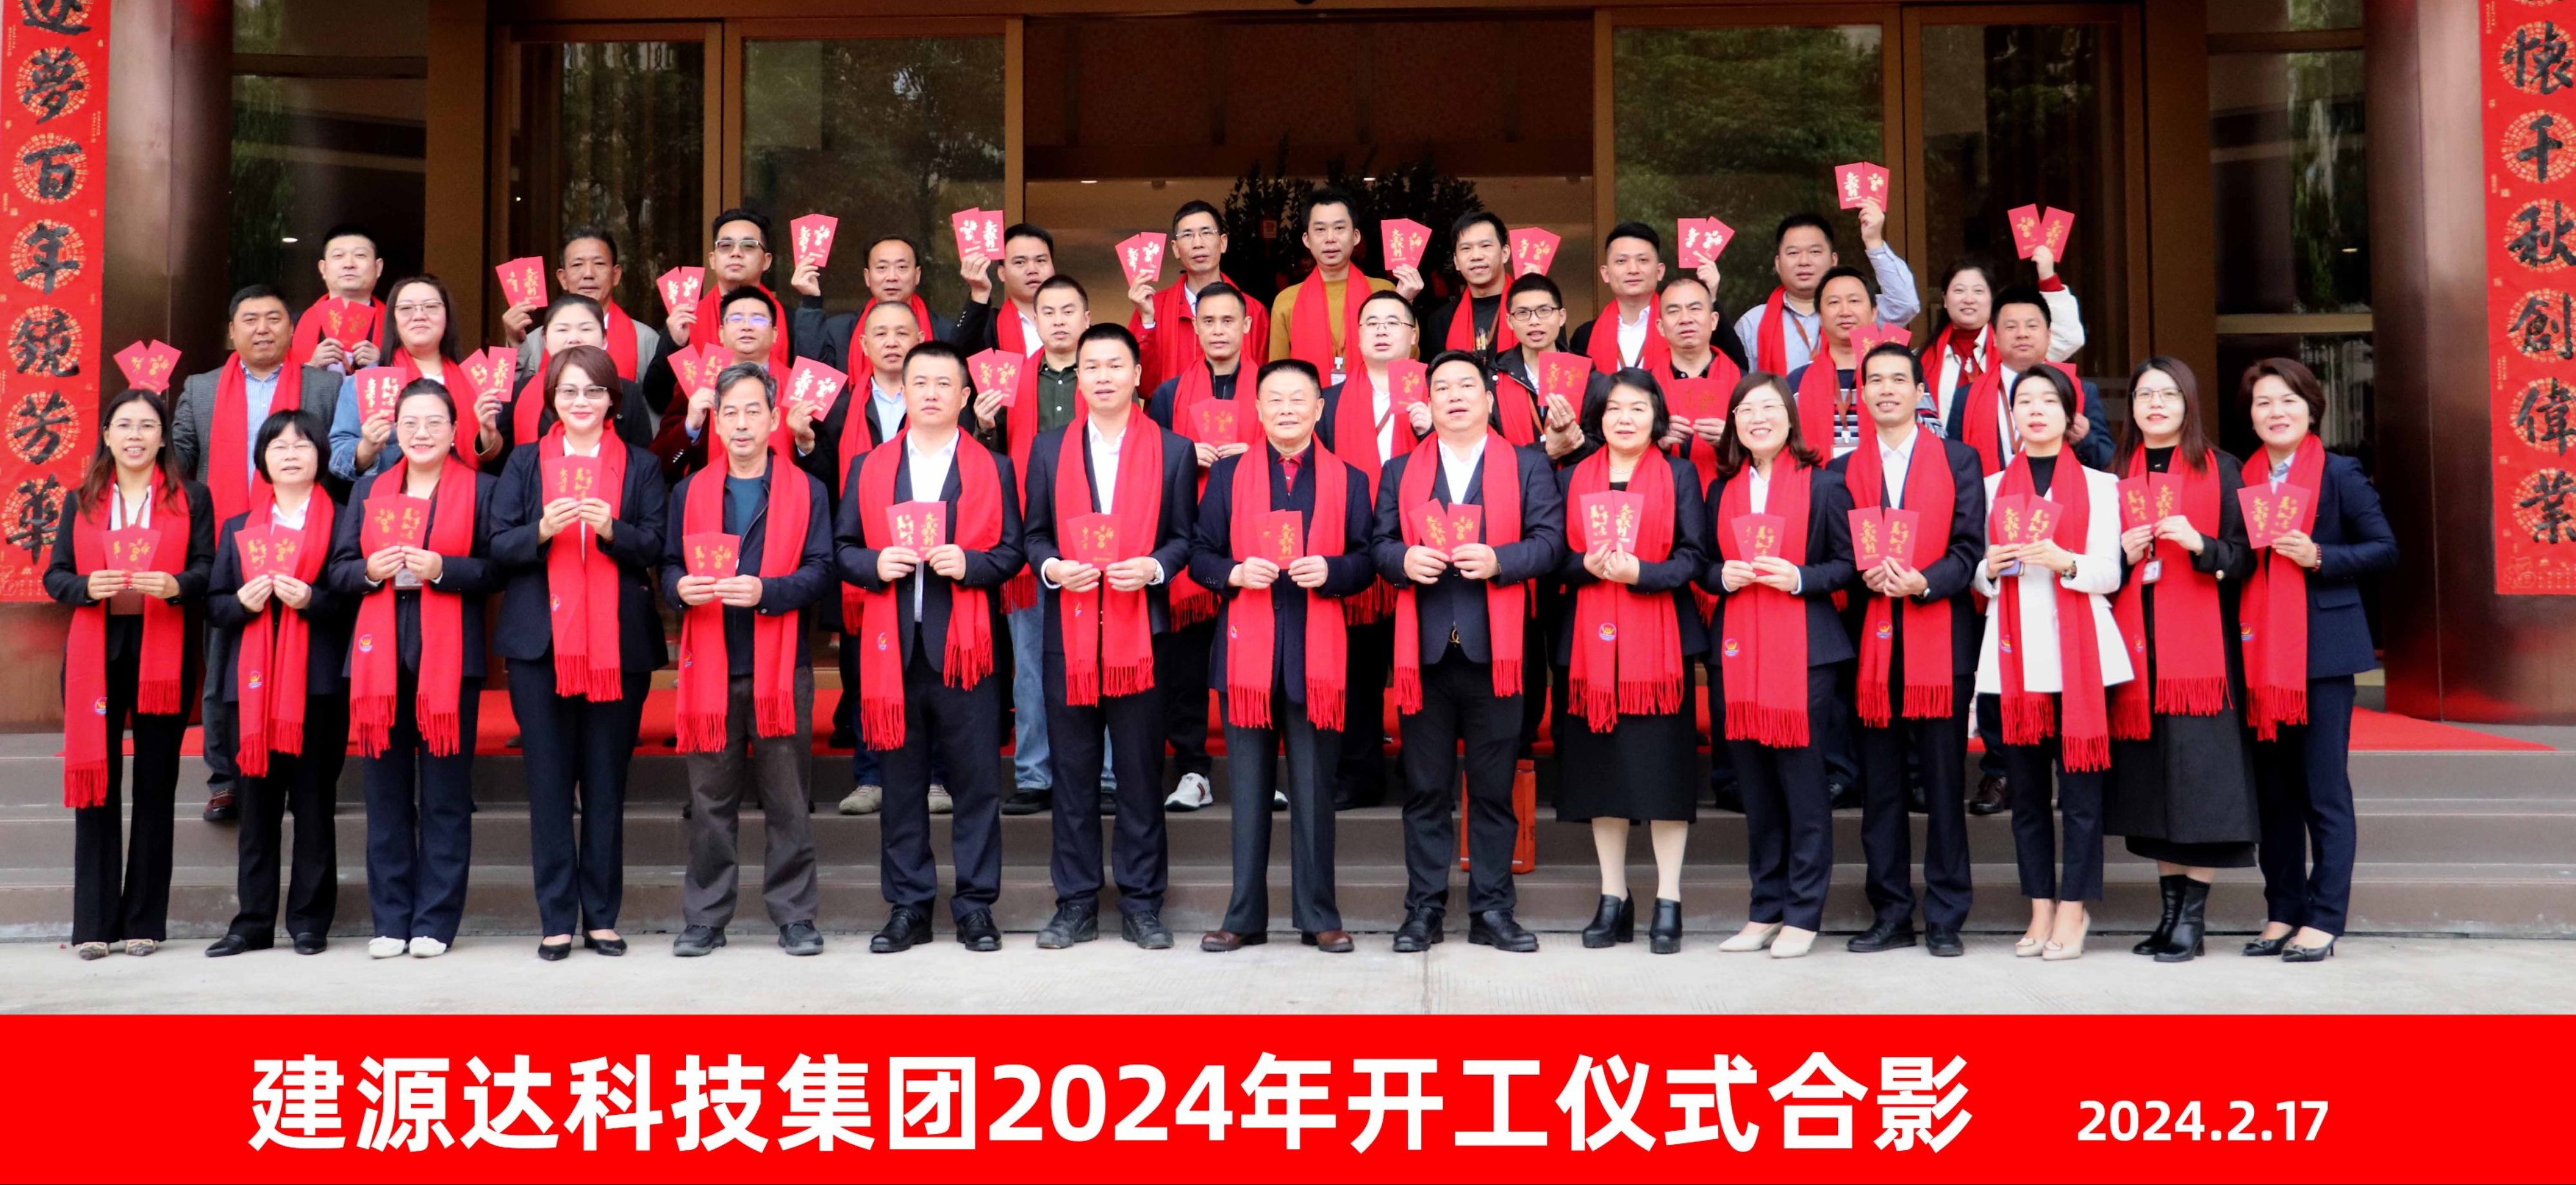 Jianyuanda Technology Group Kickstarts 2024 with Grand Groundbreaking Ceremony and Red Envelope Tradition